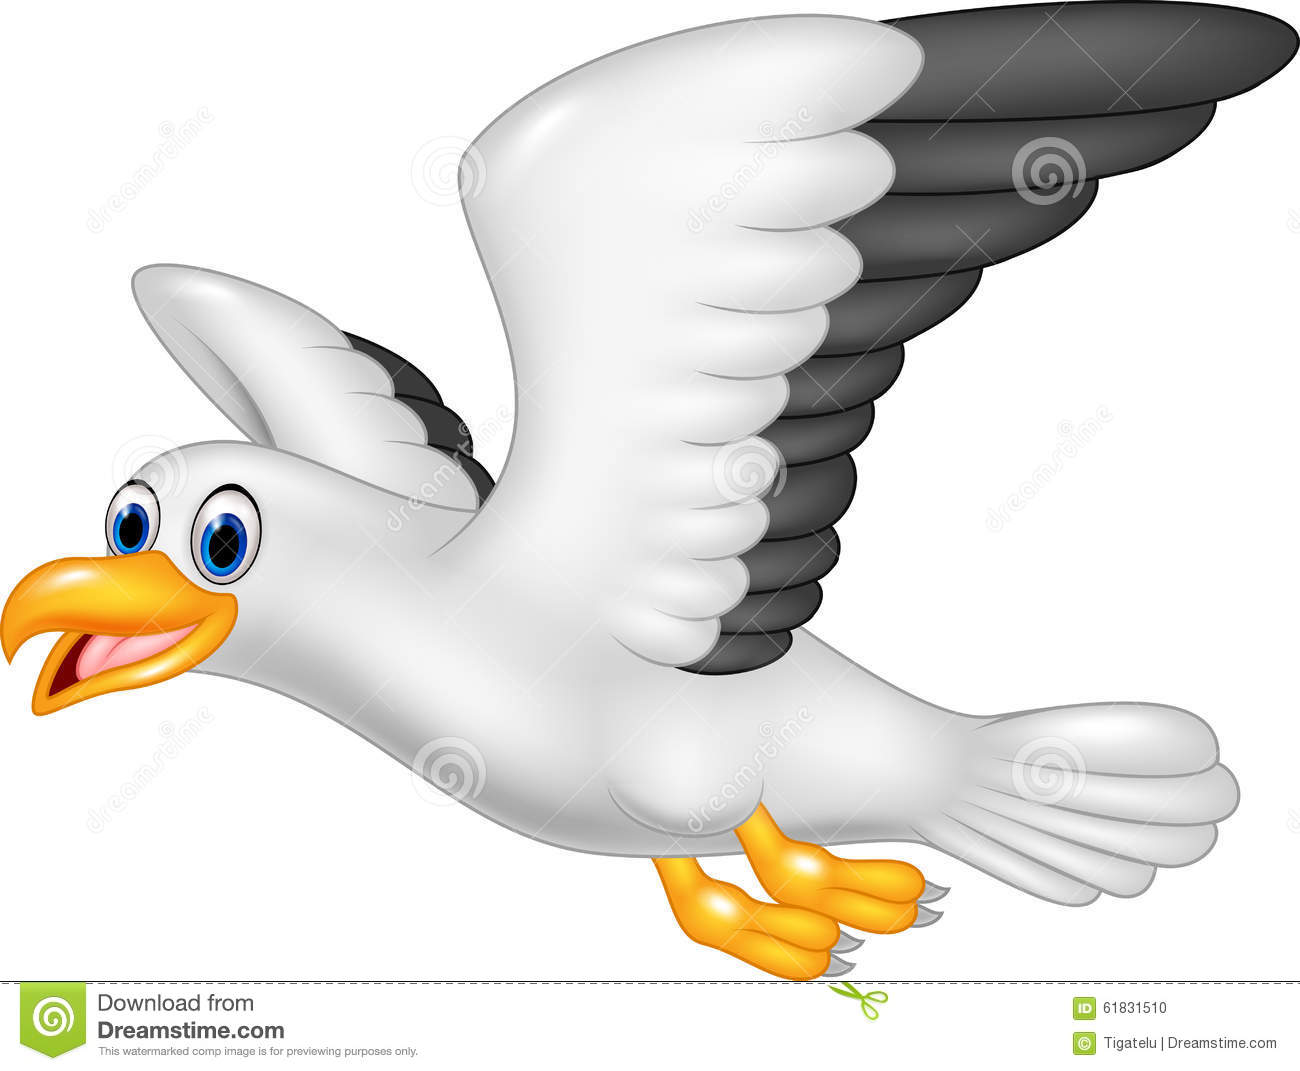 Seagull clipart #10, Download drawings